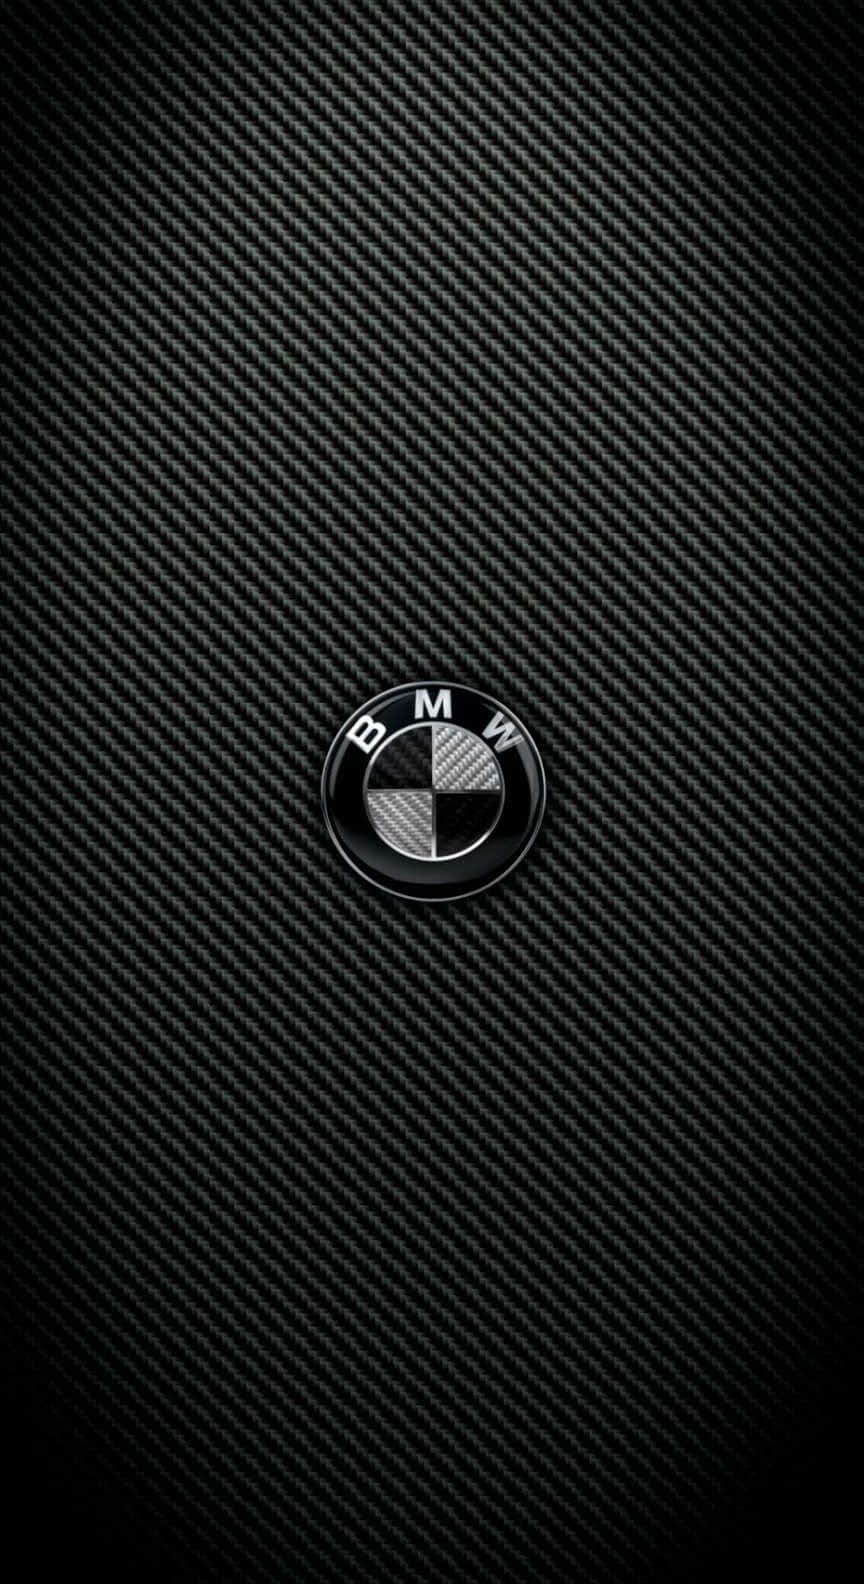 Get Ready for the All-New Carbon Fiber iPhone Wallpaper